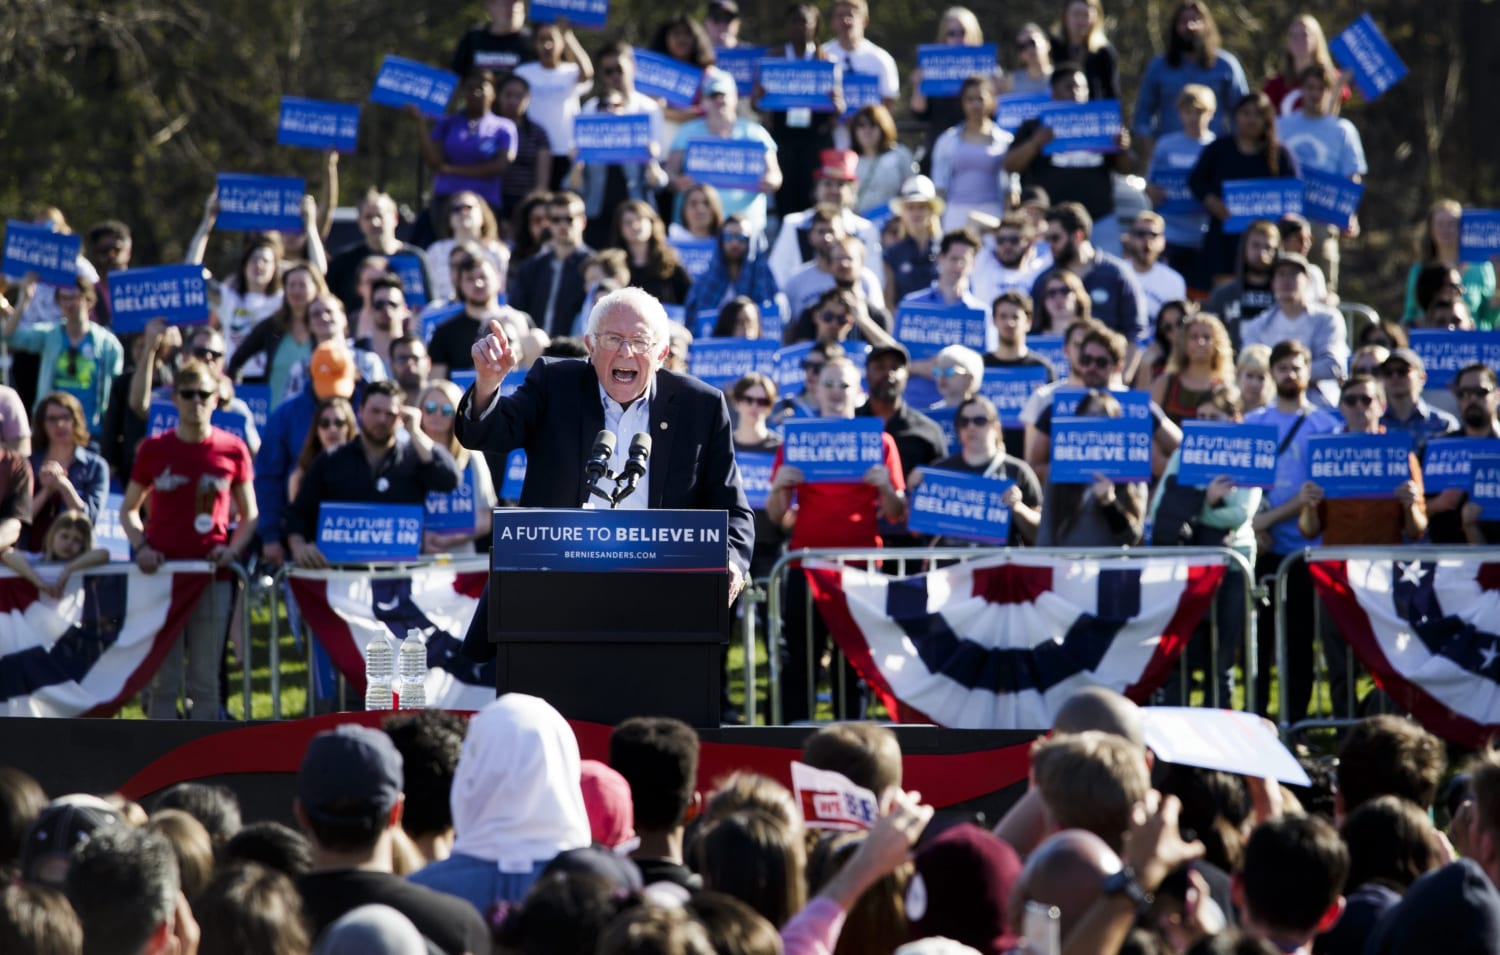 Sanders Campaign Claims Record-Breaking Crowd at New York Rally